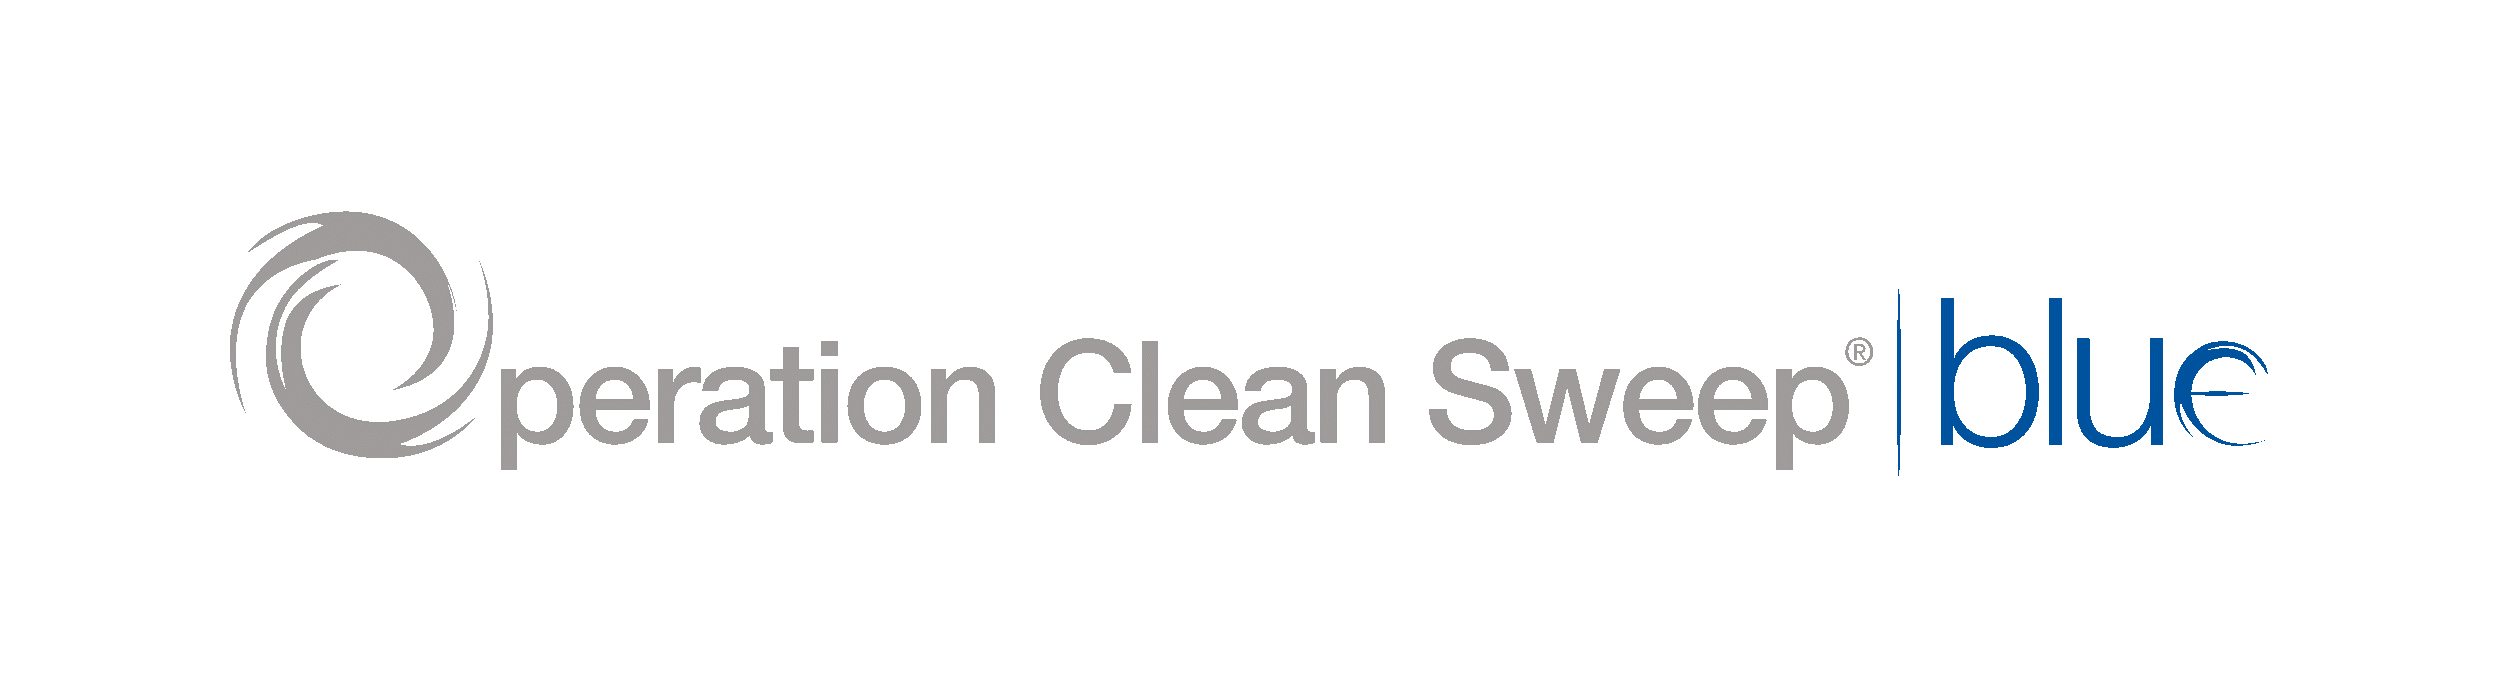 Operation Clean Sweep | blue Logo